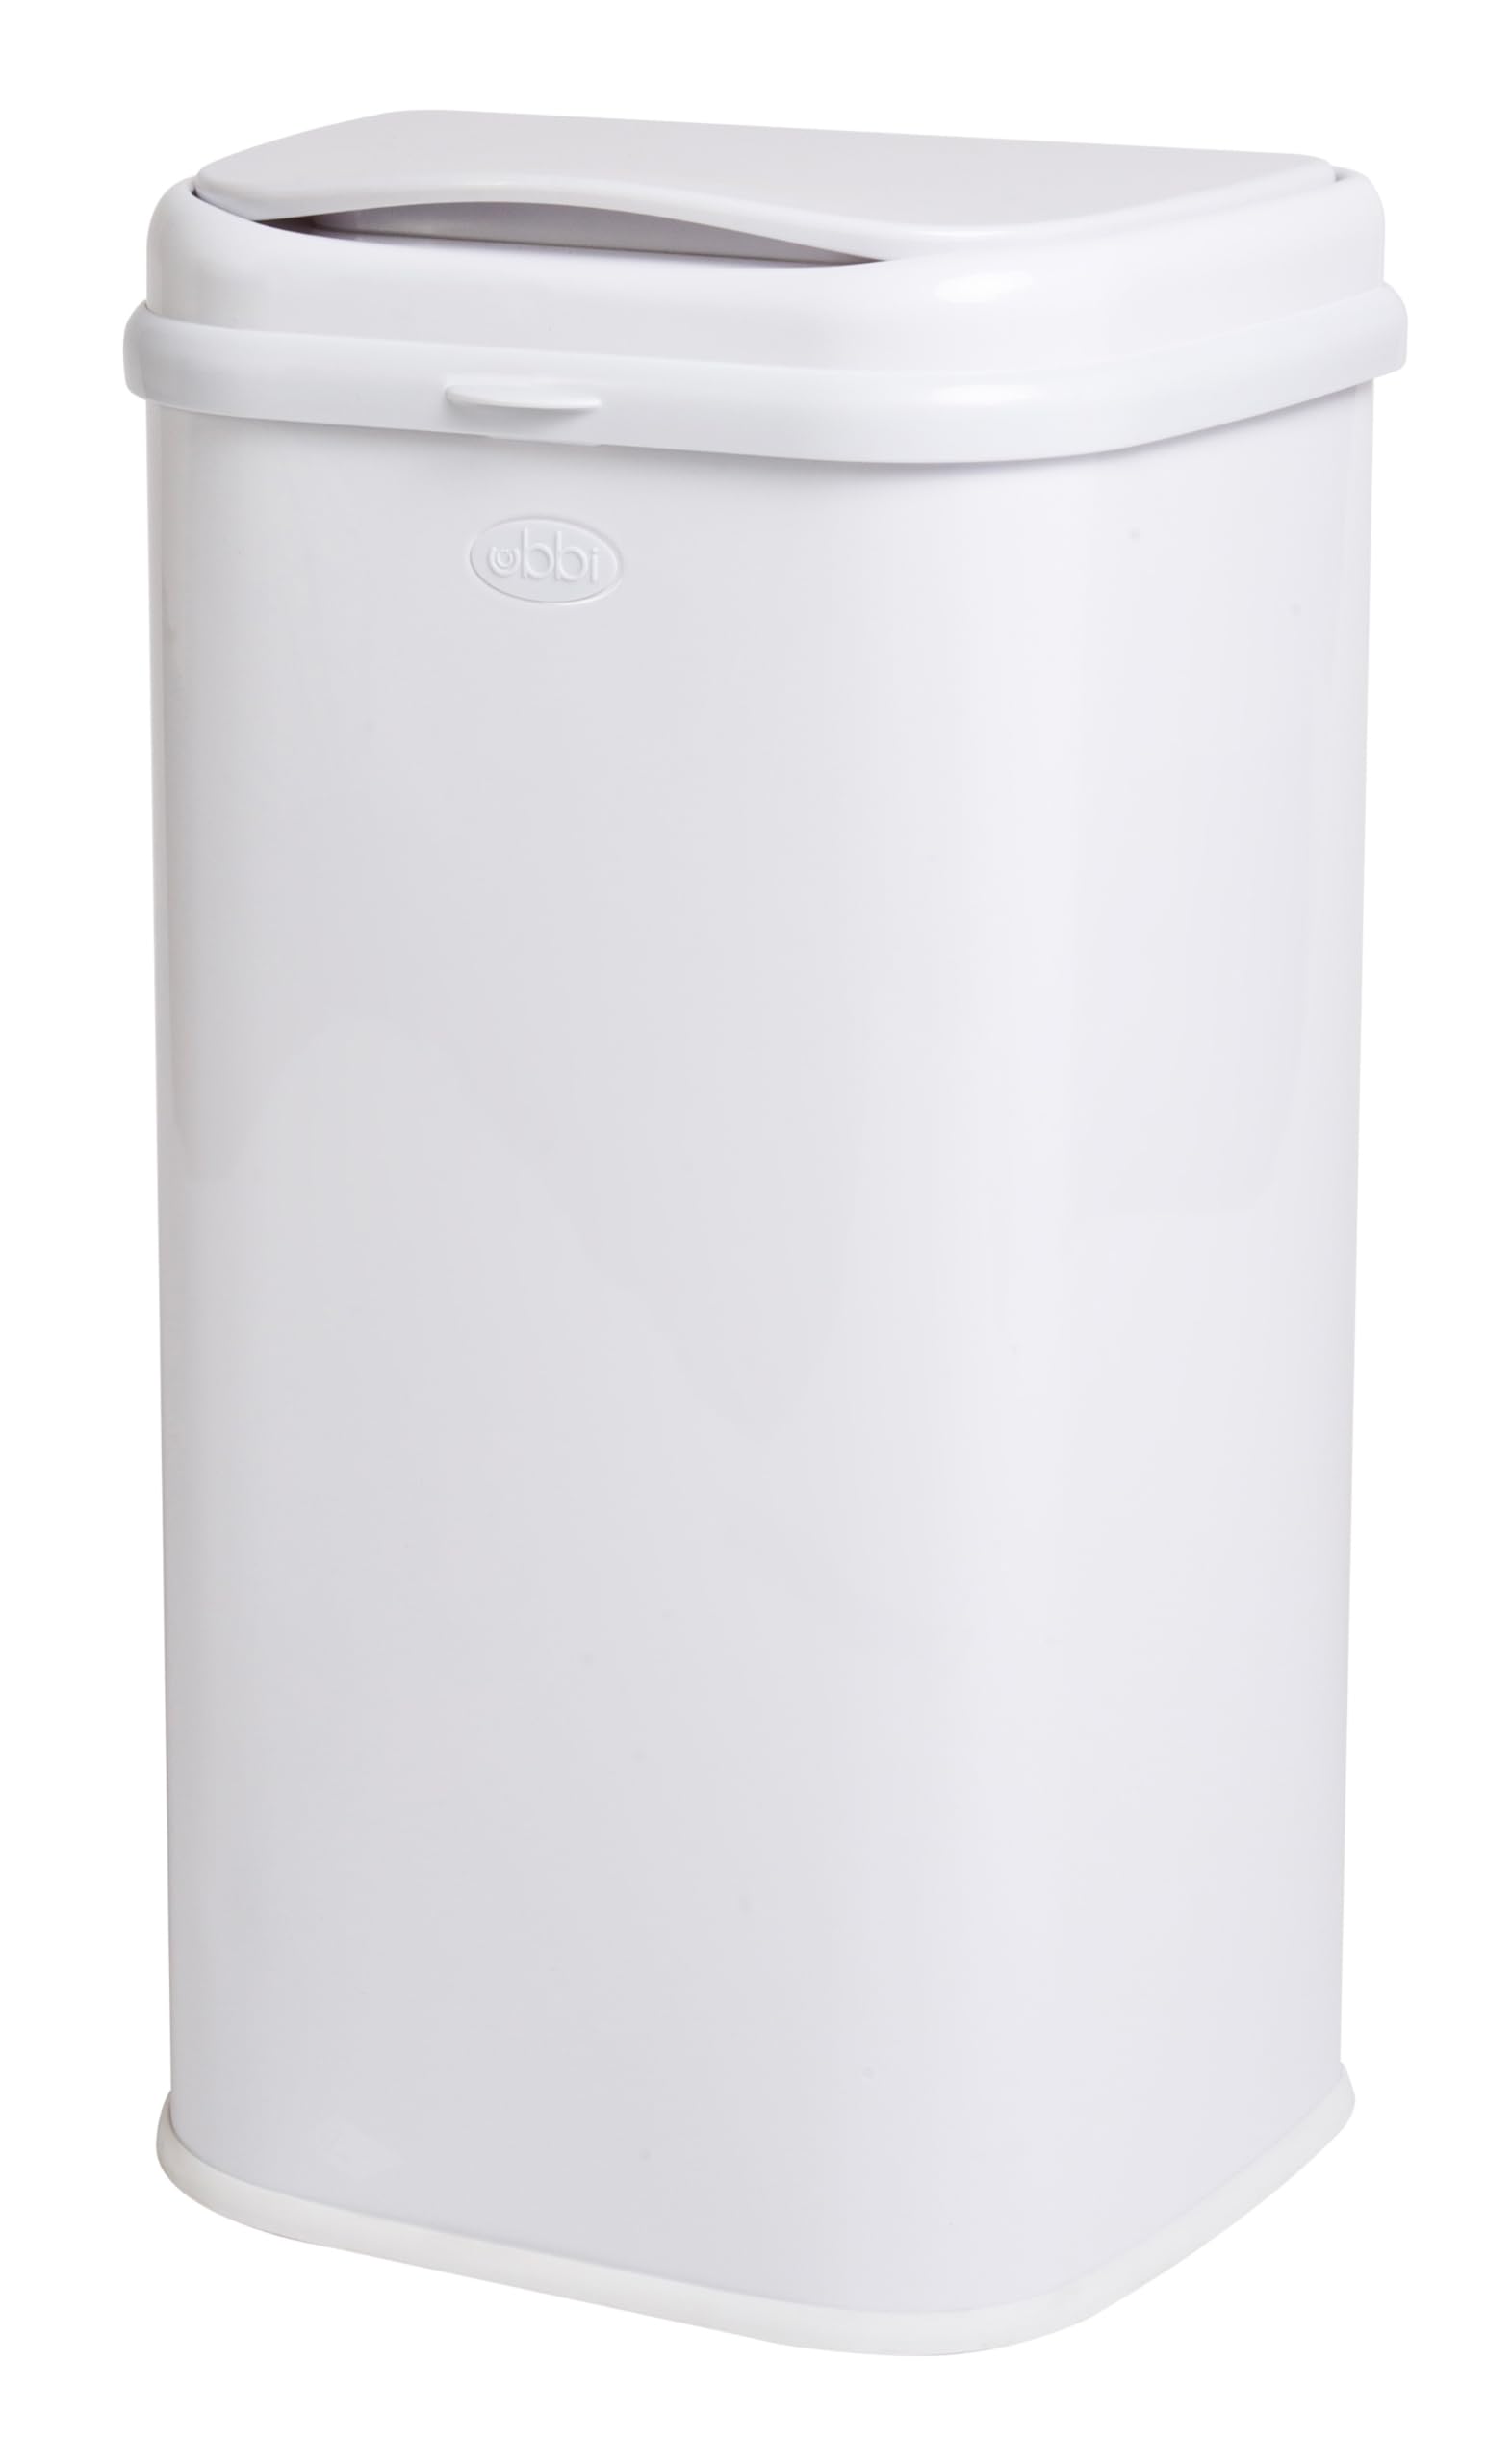 Ubbi Adult Diaper Pail, Stainless Steel Odor Locking, No Special Bag Required, Awards-Winning, Modern Design, White